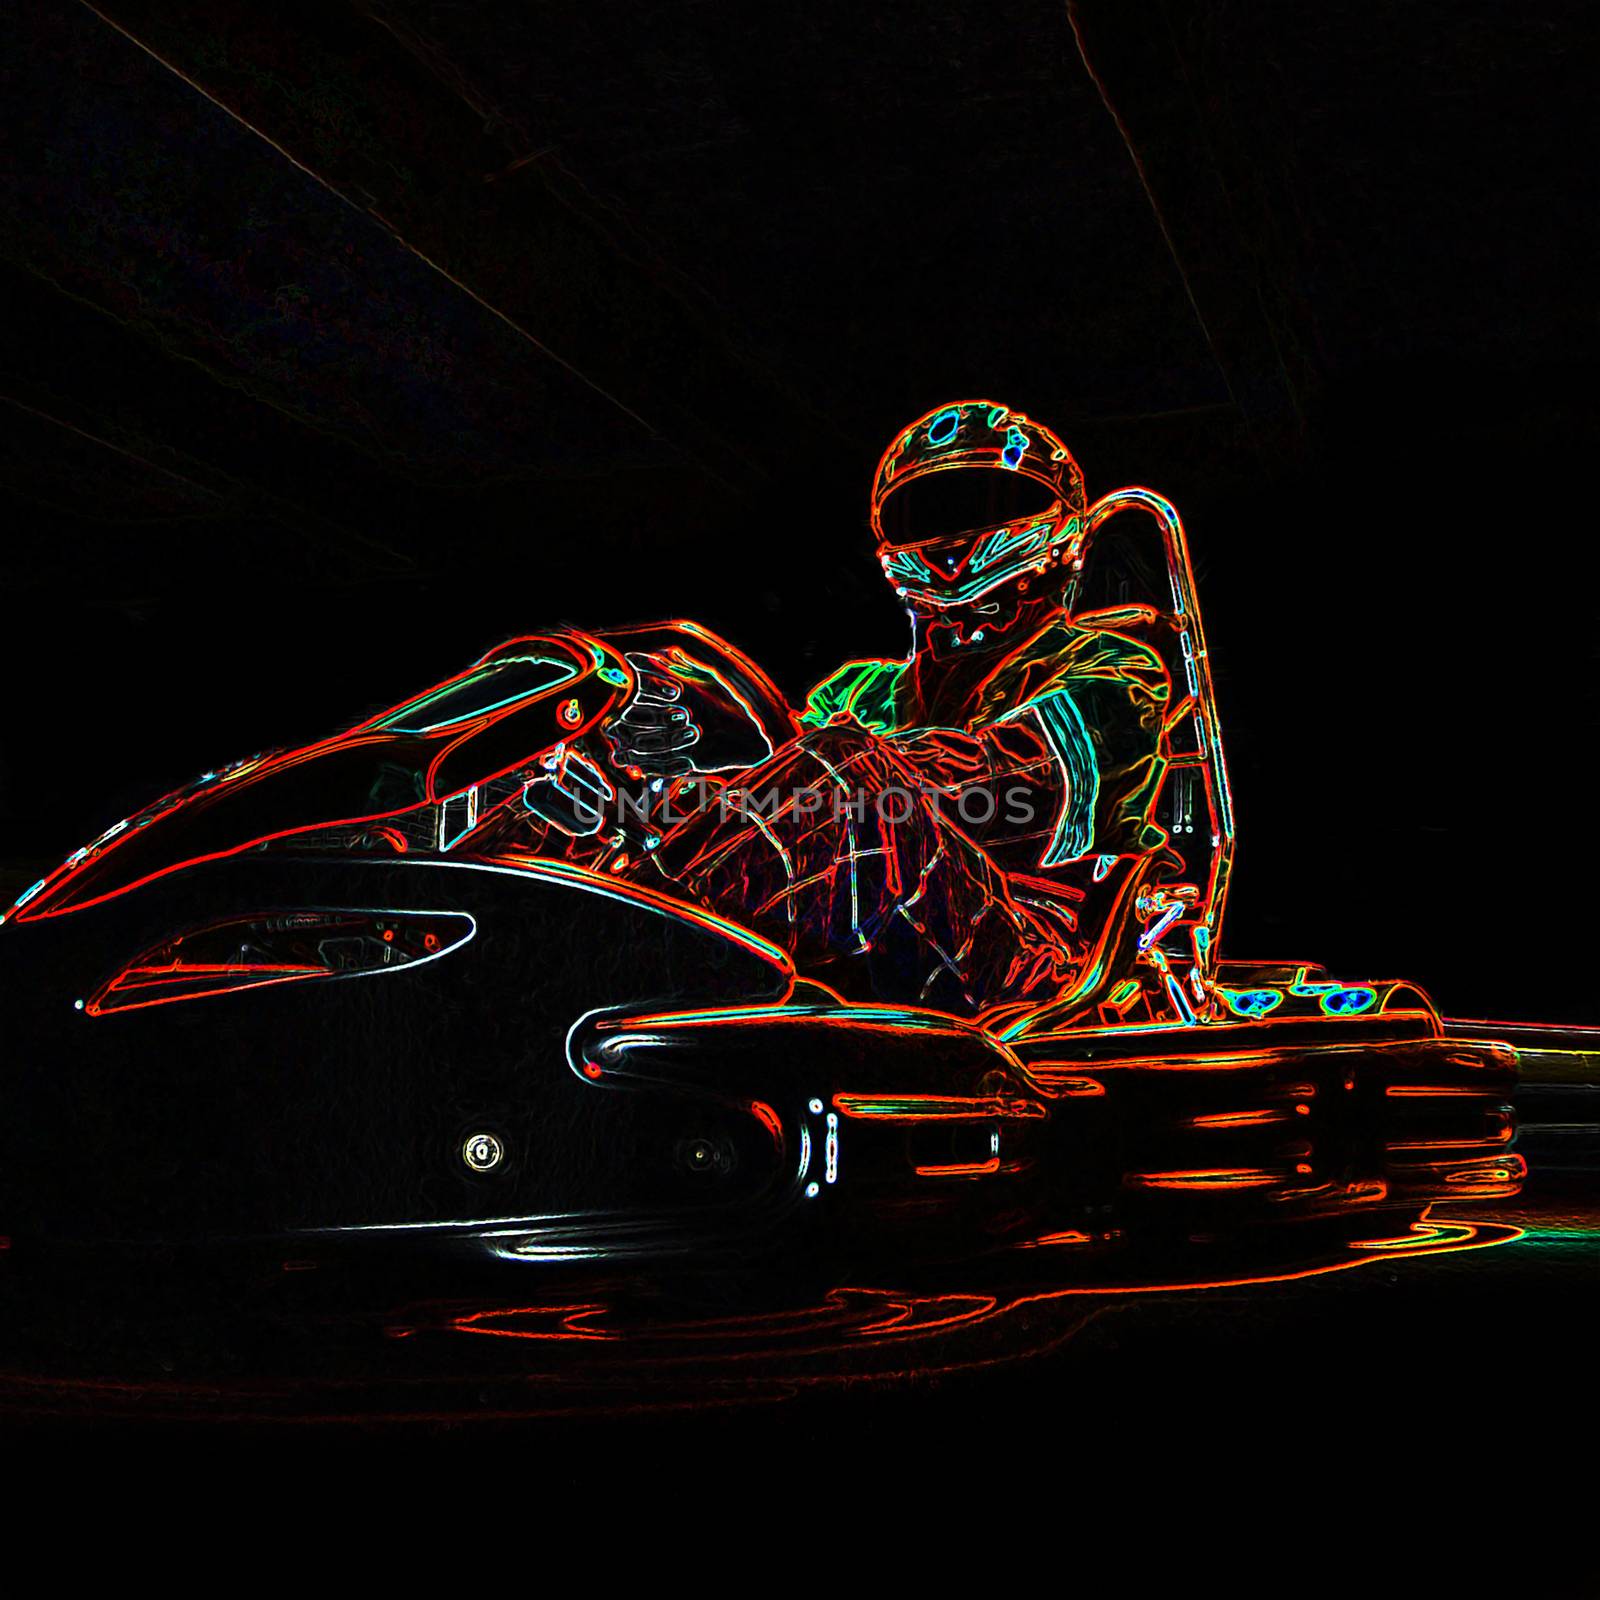 Kart racing neon light picture. Man in karting vehicle on track. by 977_ReX_977